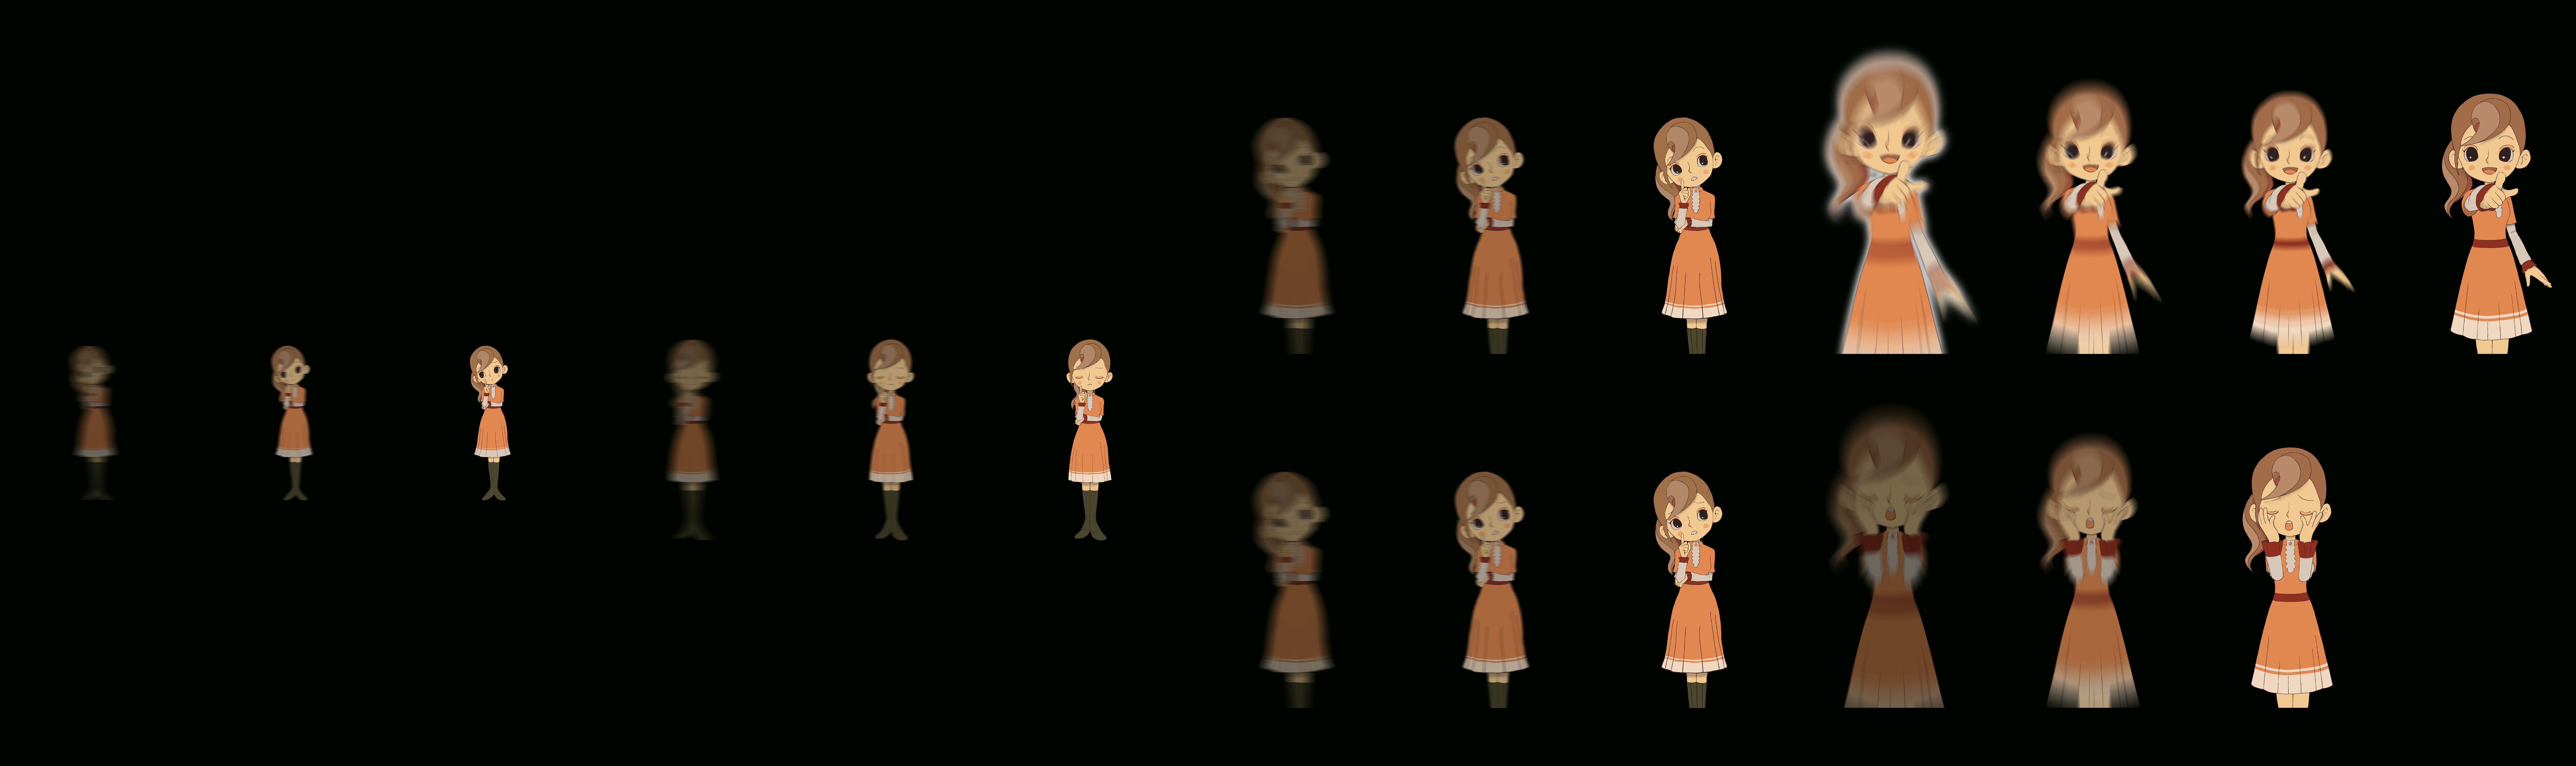 Professor Layton and the Unwound Future in HD - Flora Puzzle Answers